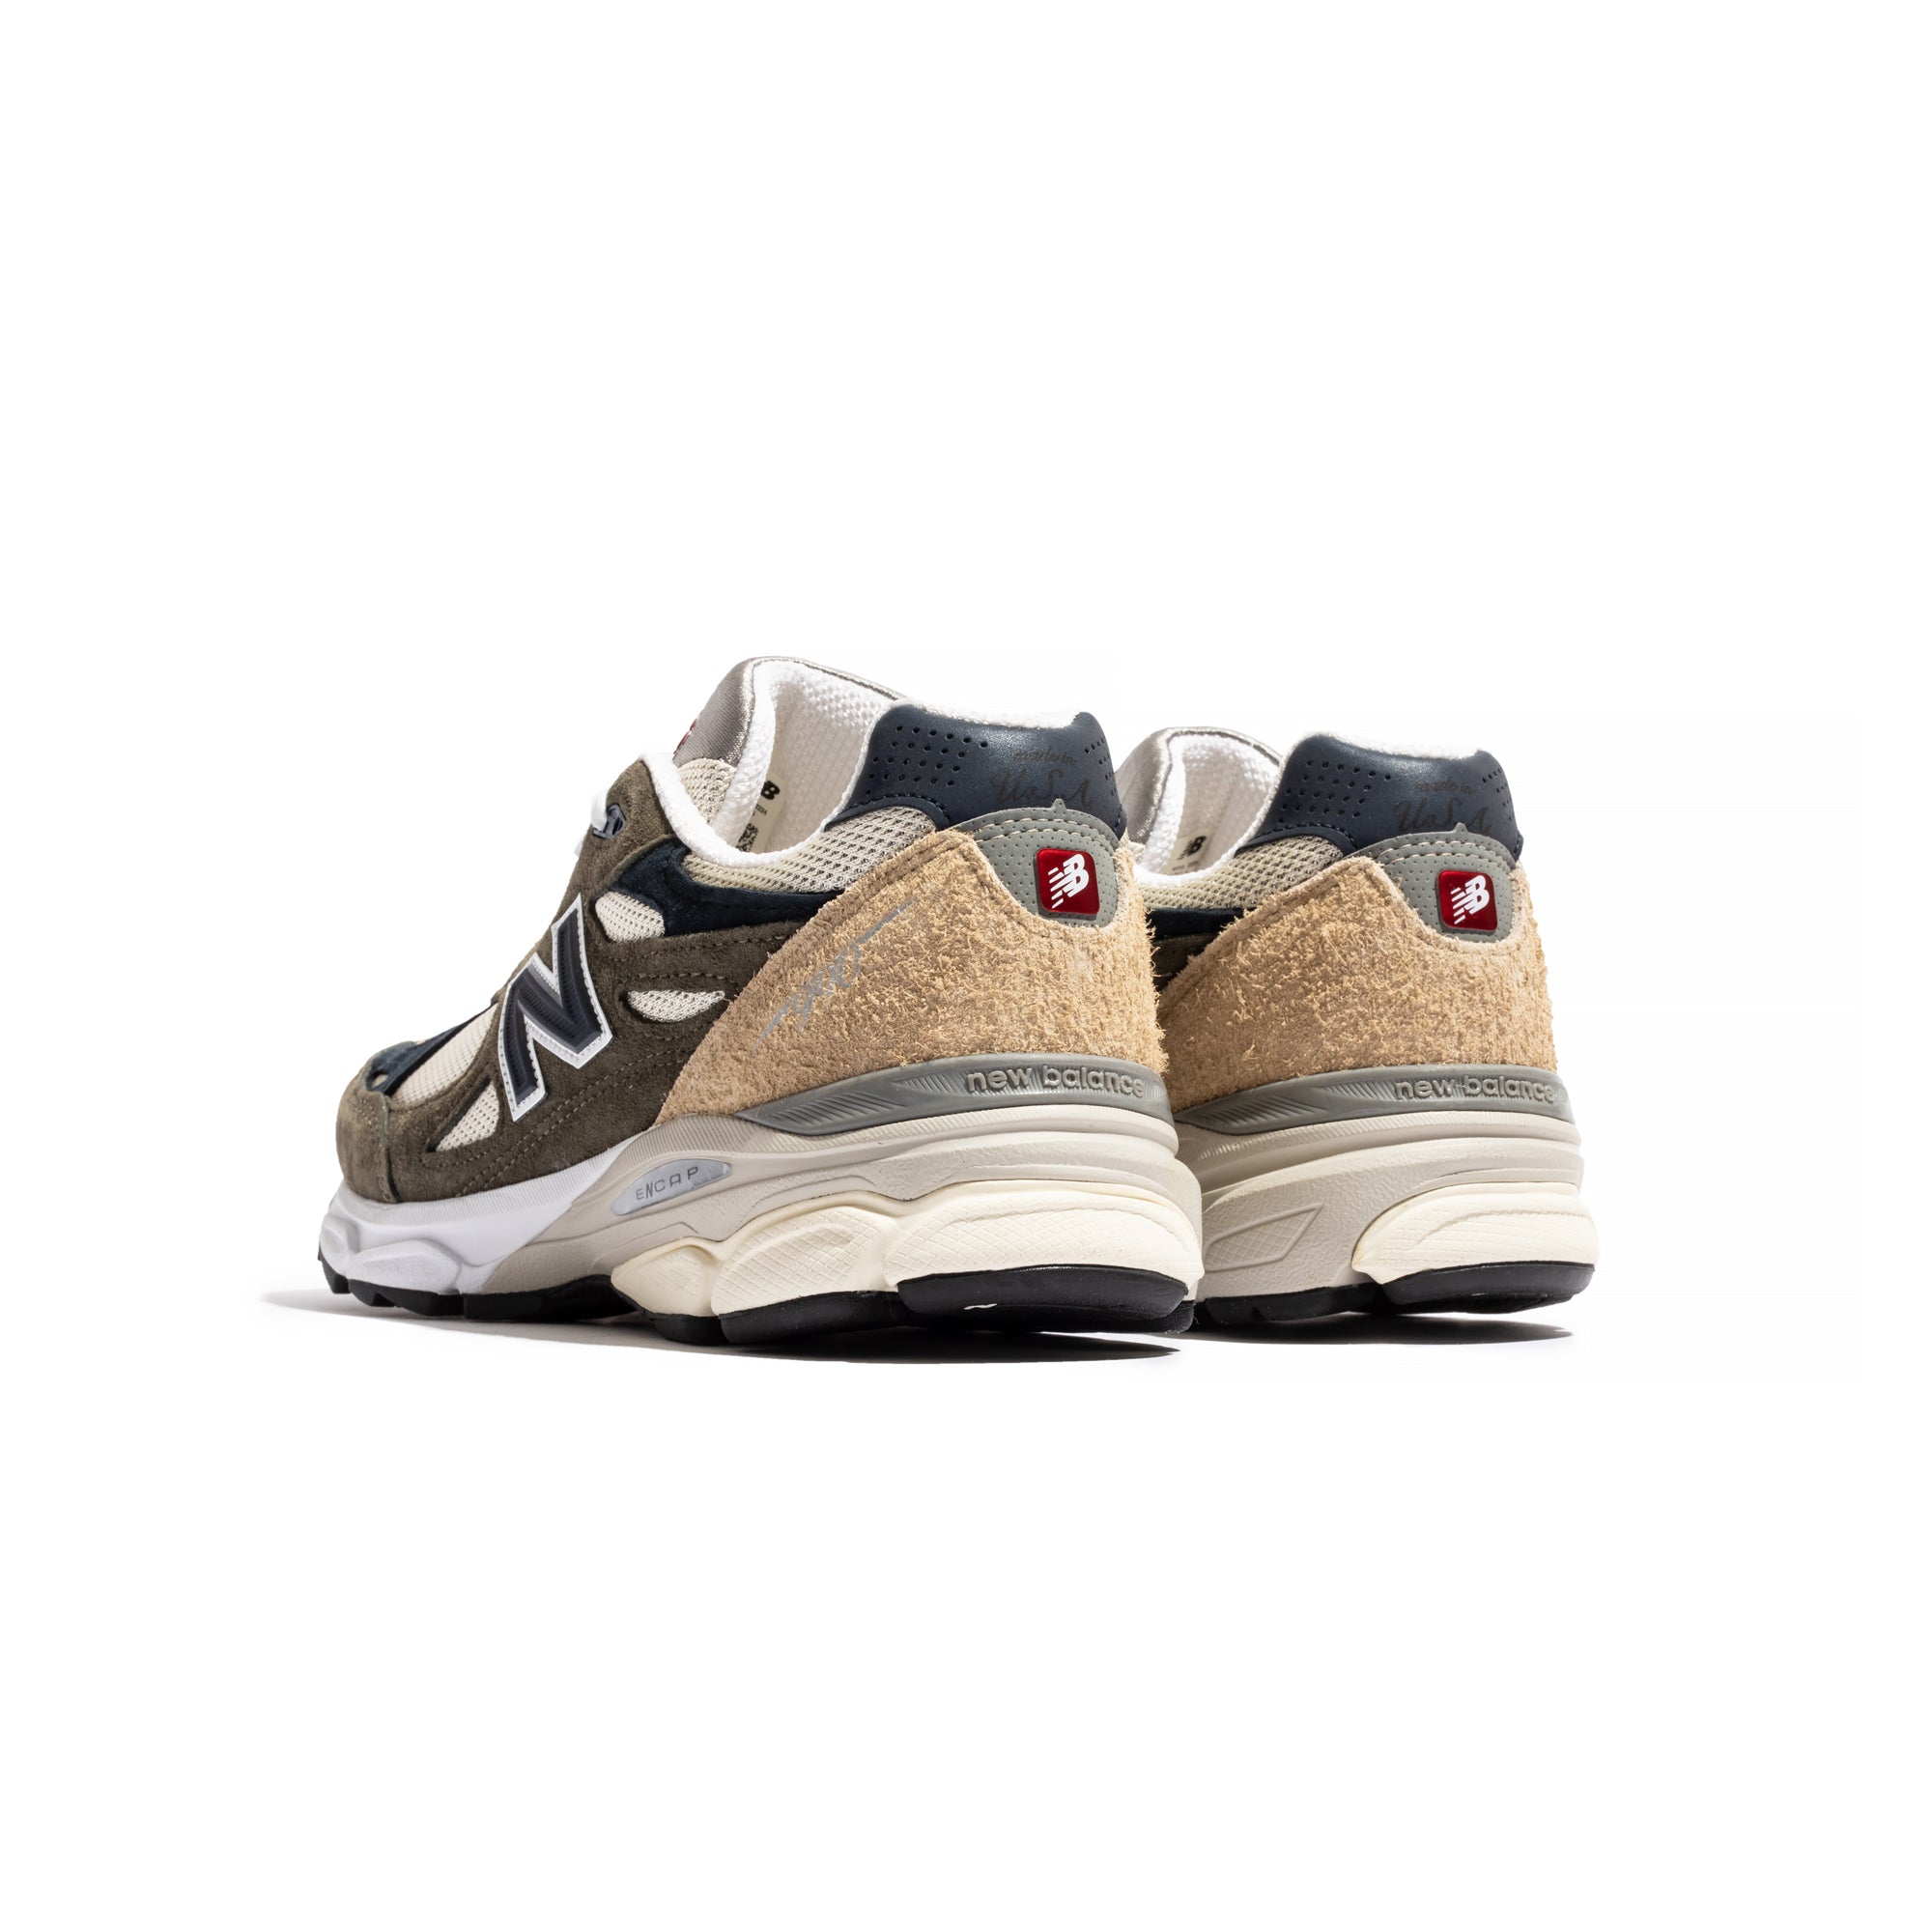 New Balance Made in USA 990v3 Shoes - 10